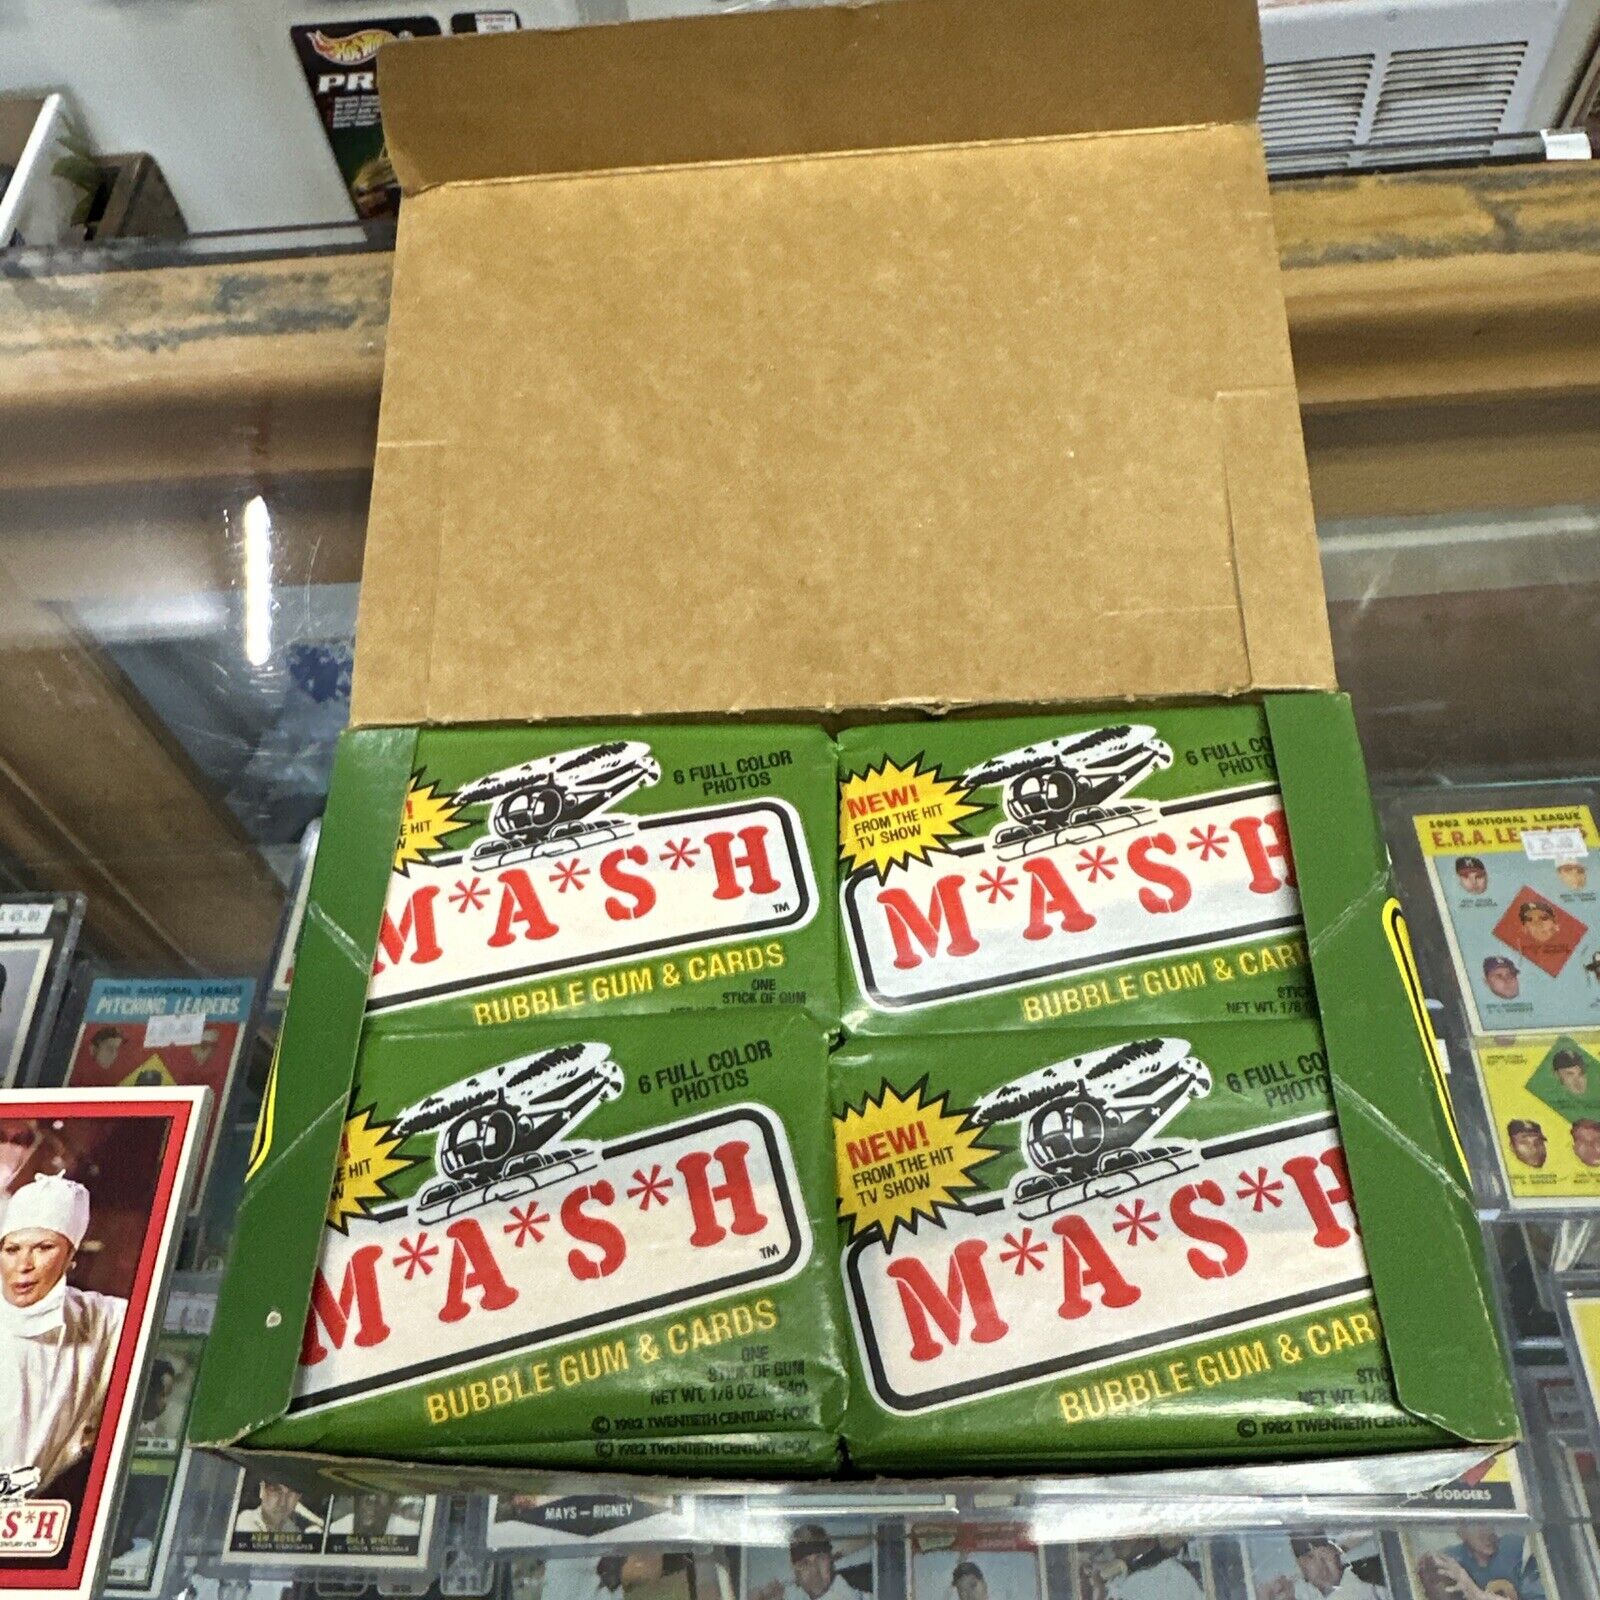 1982 Donruss Mash Trading Card Set Wax Pack Box Unopened Packs M*A*S*H Excellent